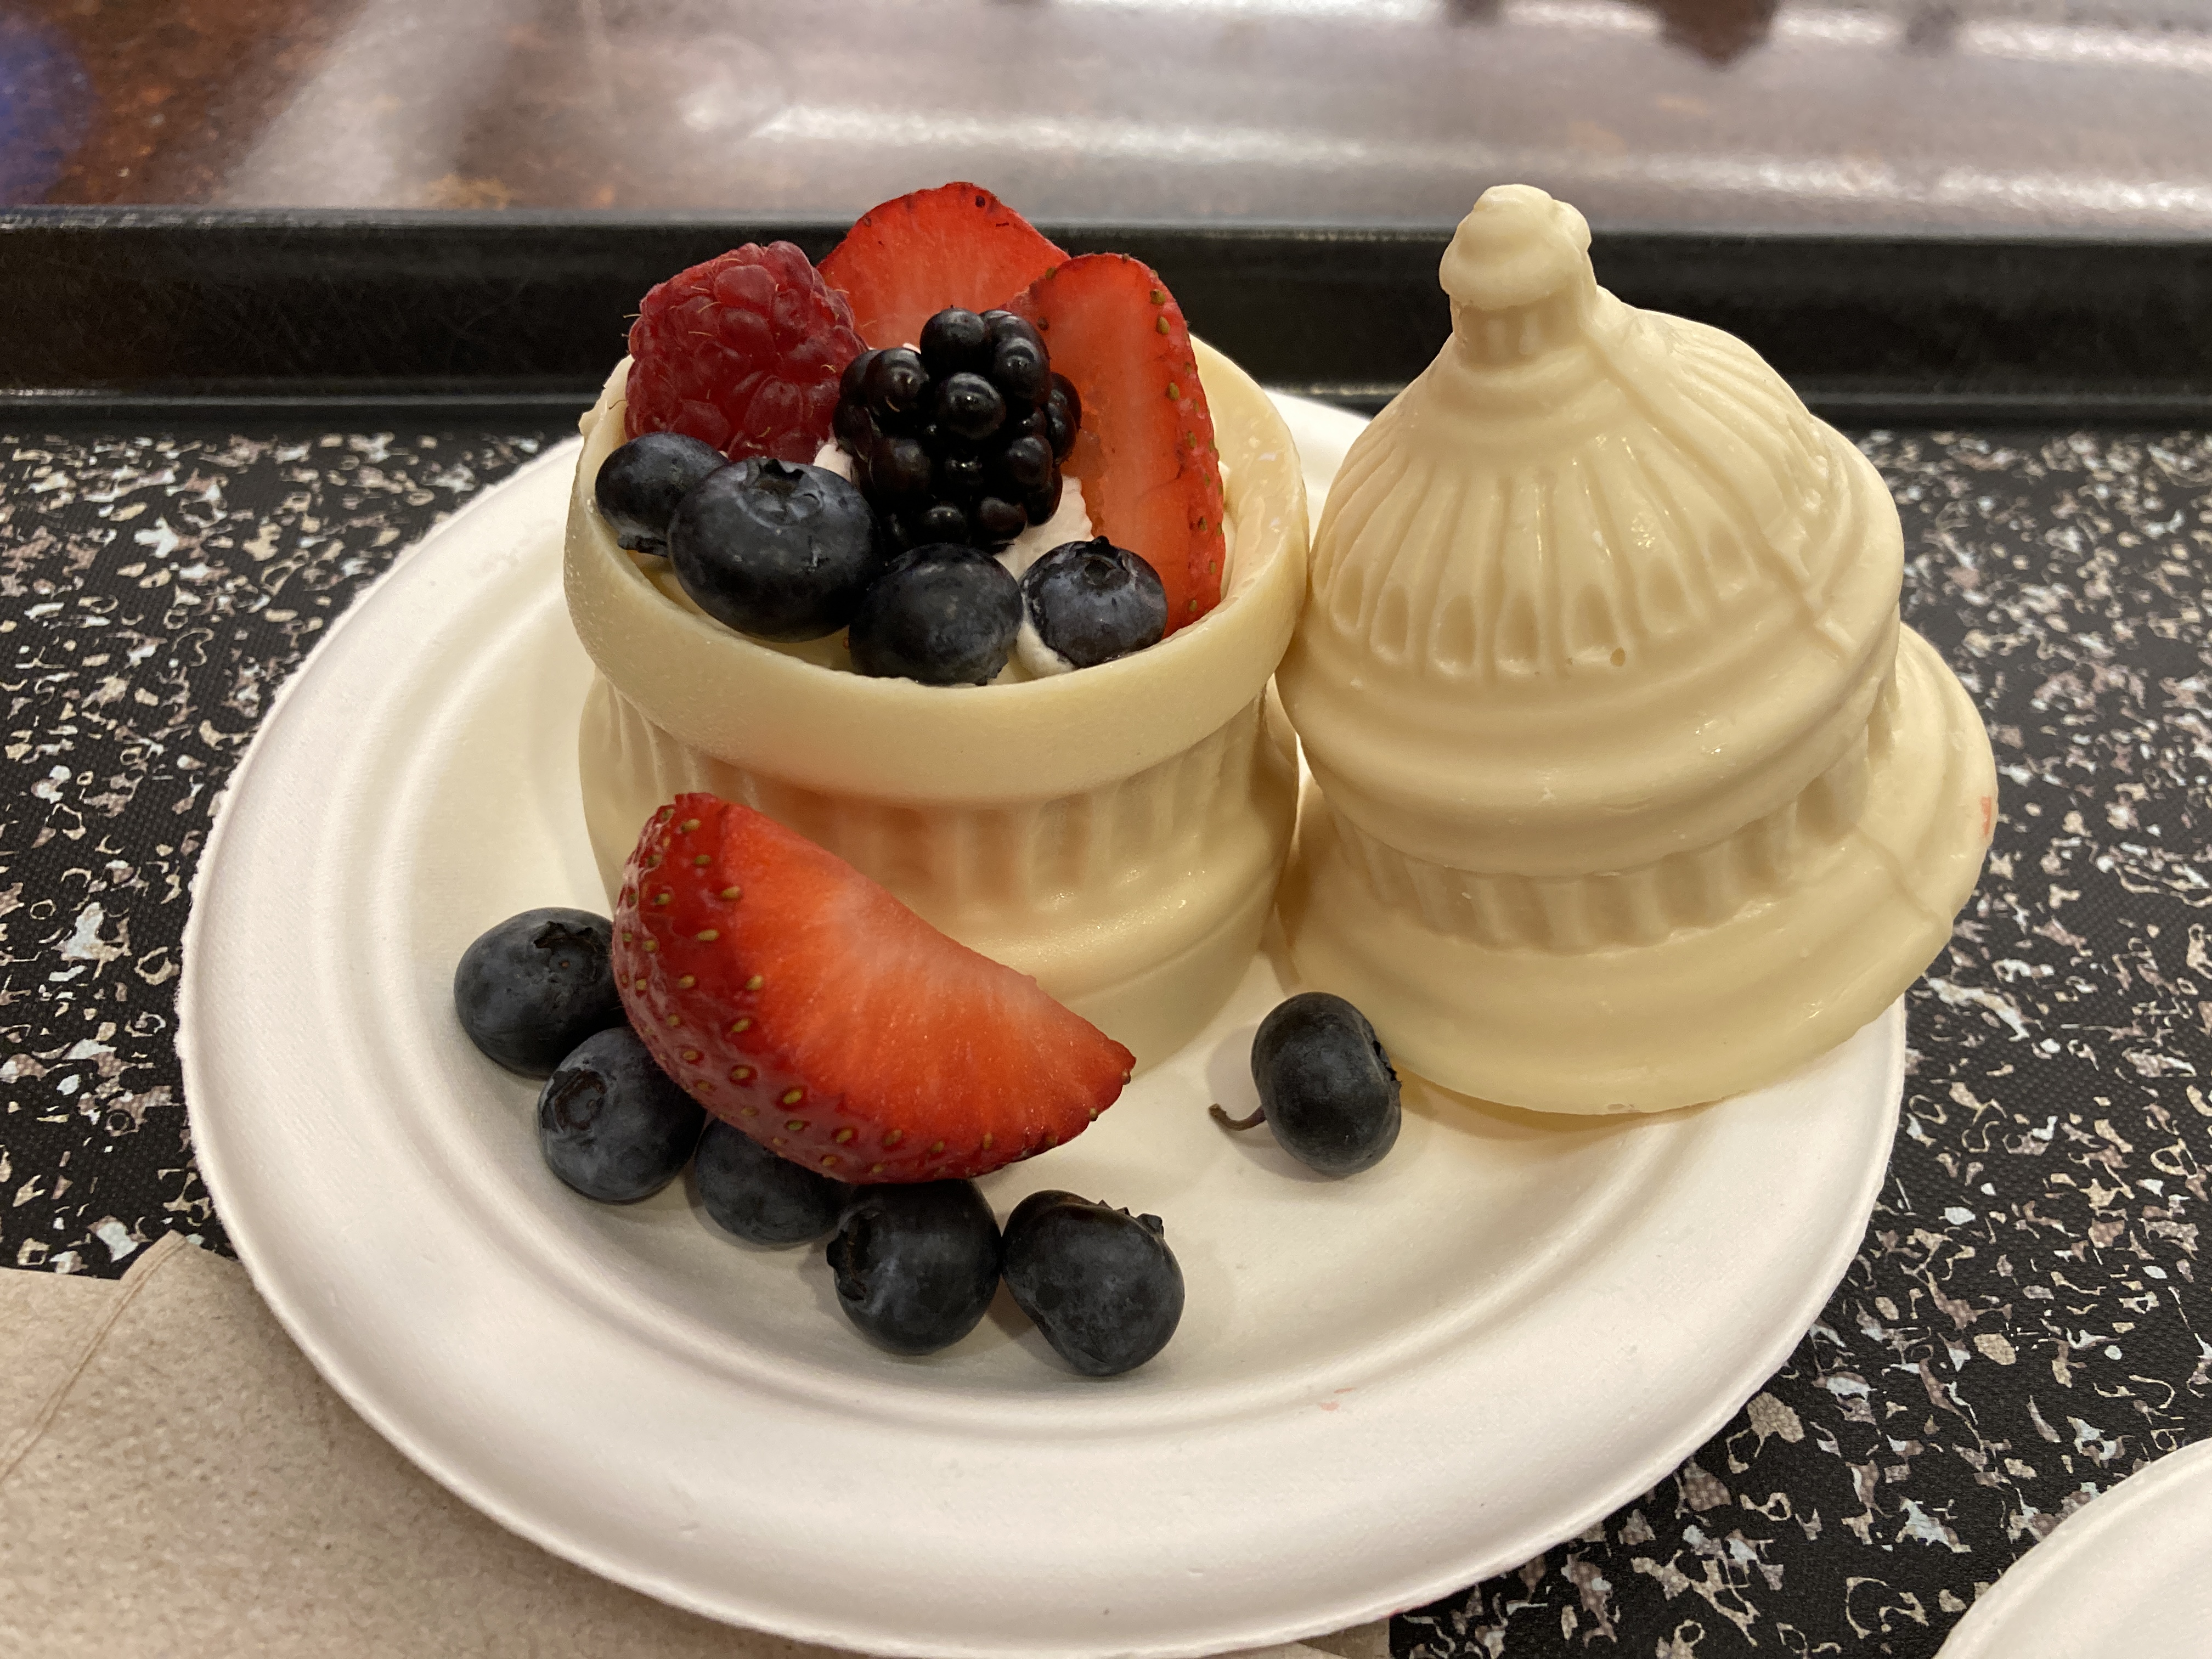 A picture of a white chocolate dessert formed in the shape of the US Capitol building's dome, filled with strawberries, blueberries, and whipped cream.